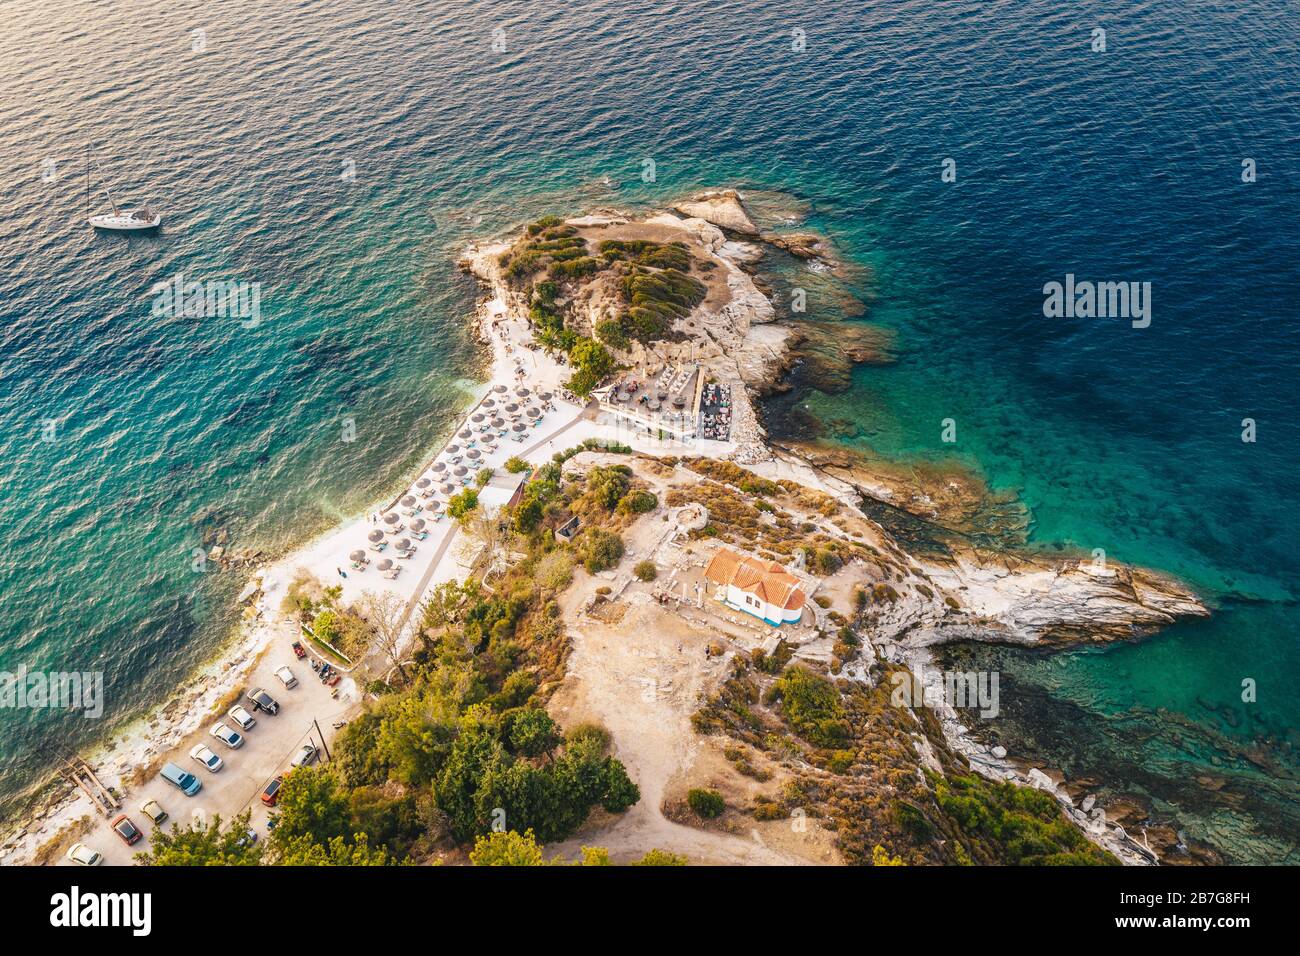 Above Thassos Island Greece, high resolution aerial view wallpaper Stock Photo